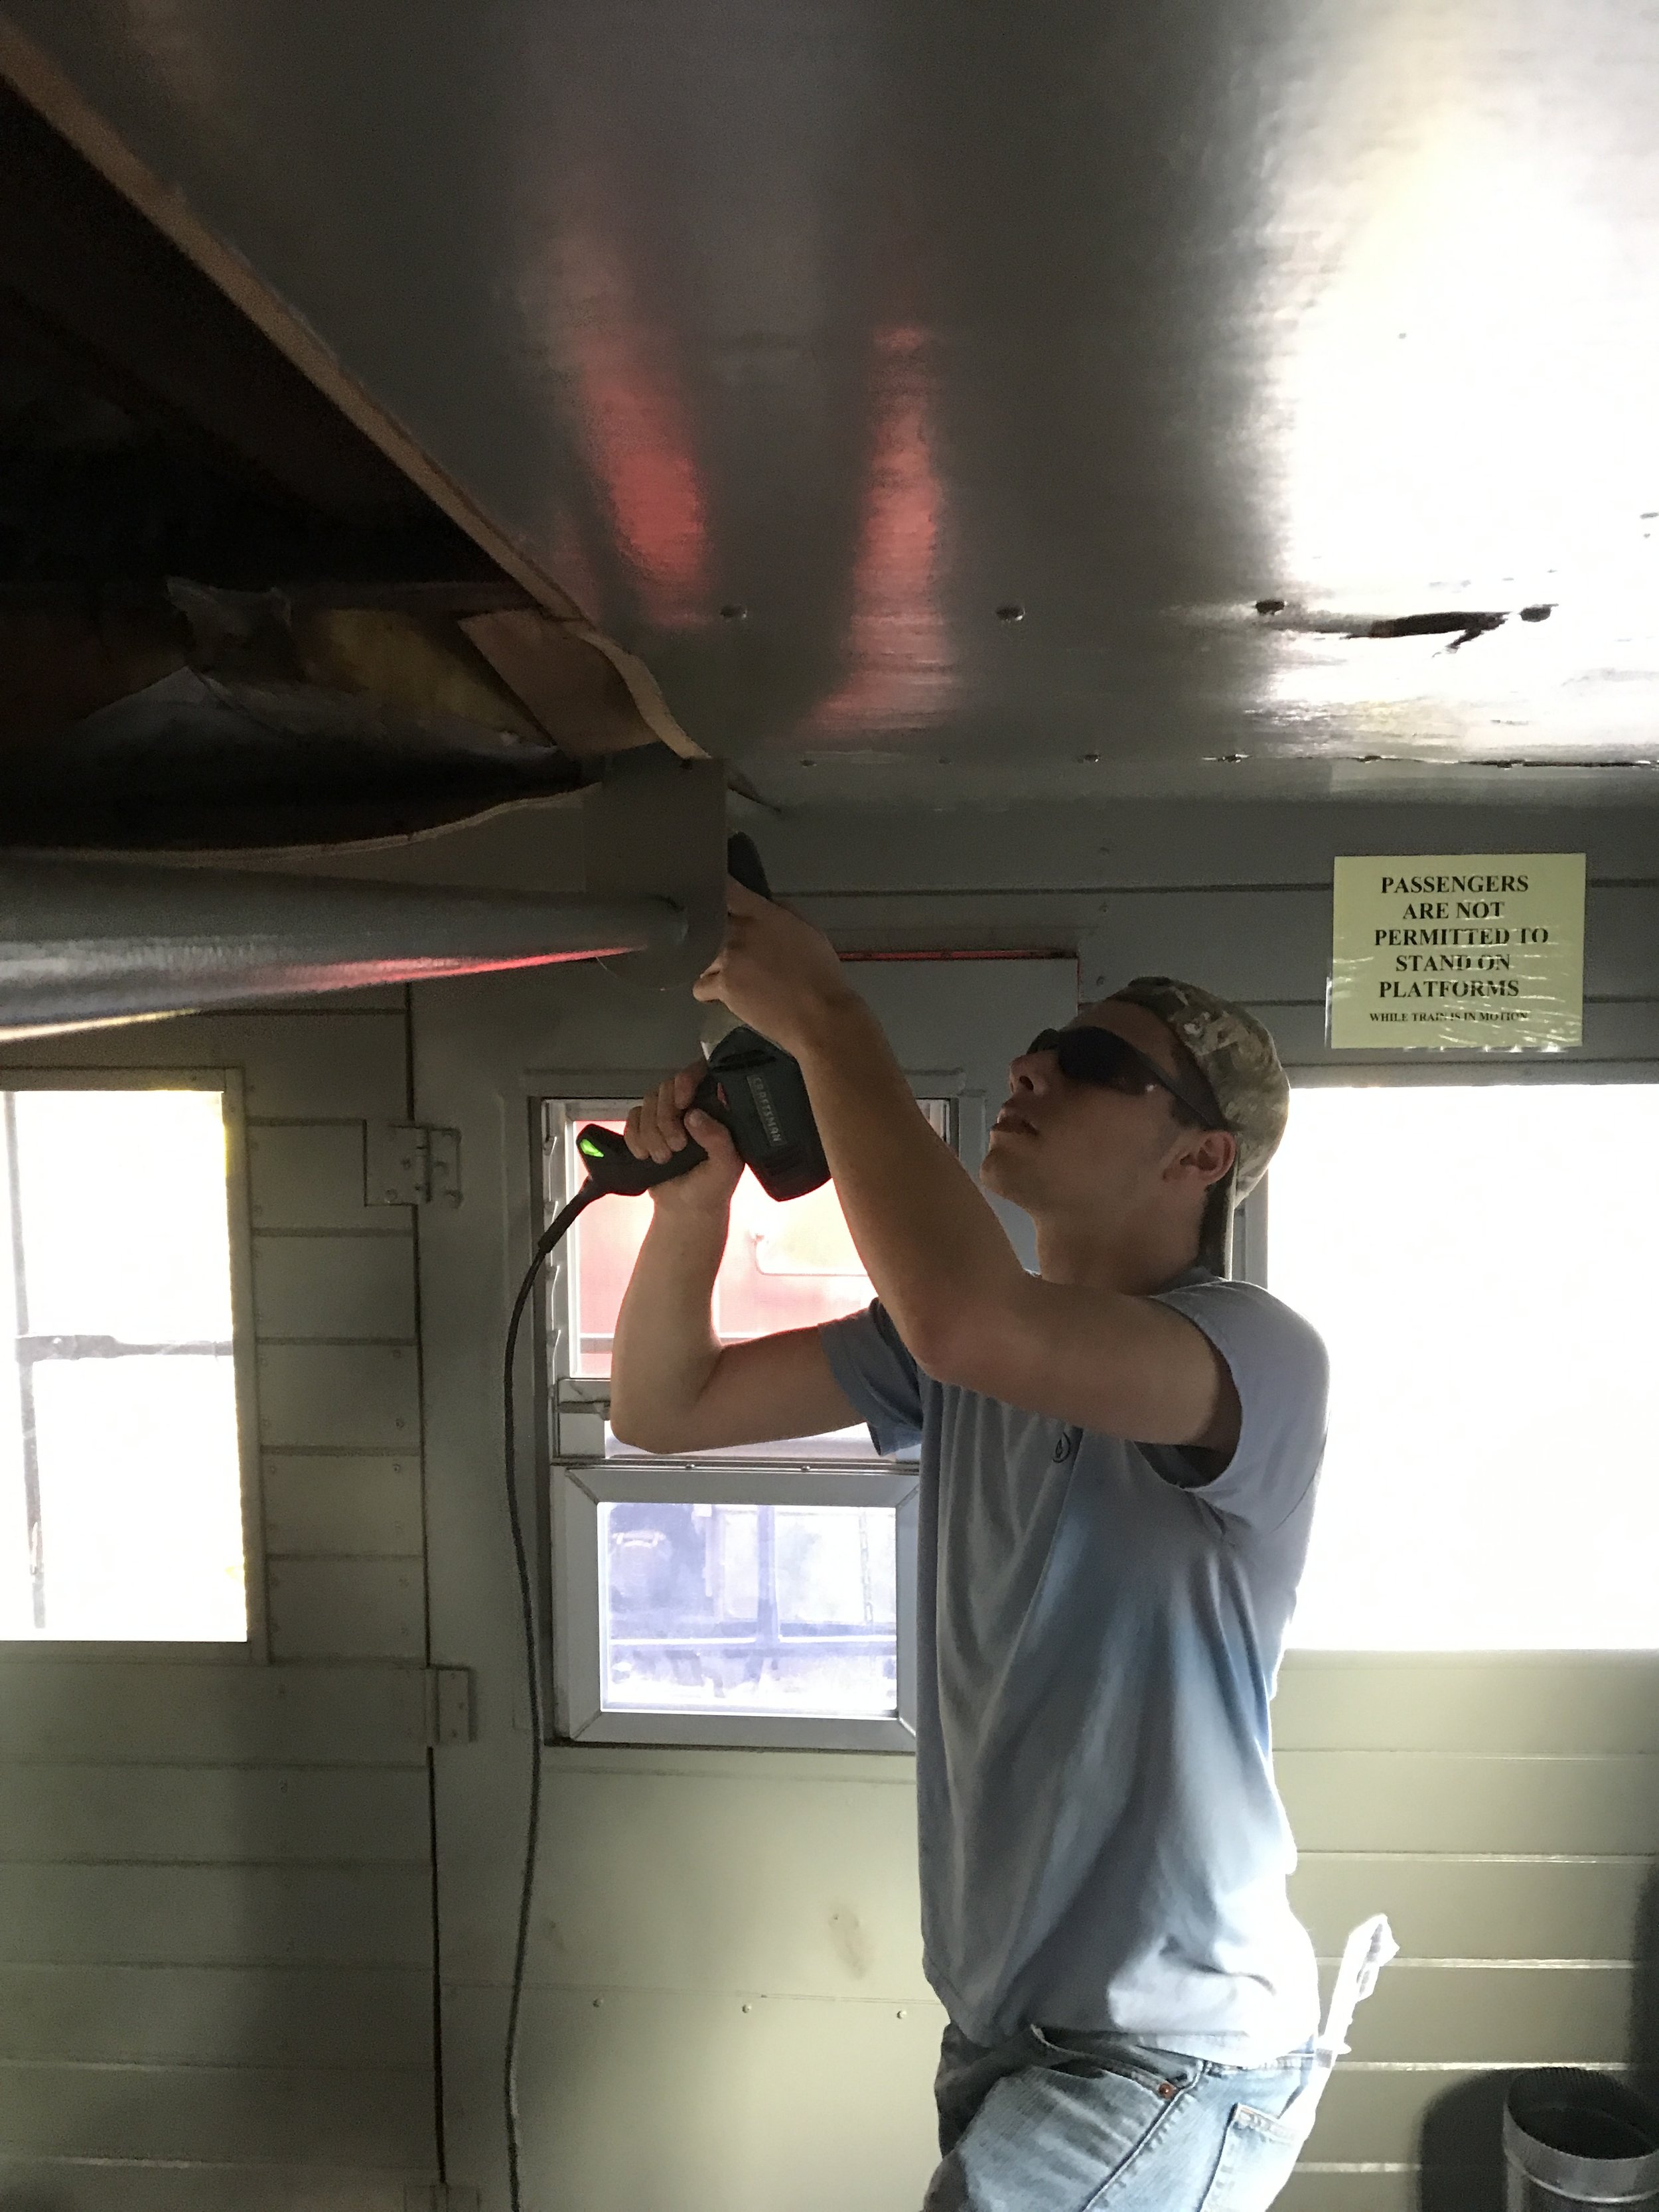  Matt Herman unscrewing wood panels which were used to replace the ceiling in part of the caboose which caught fire in the Conrail era. 